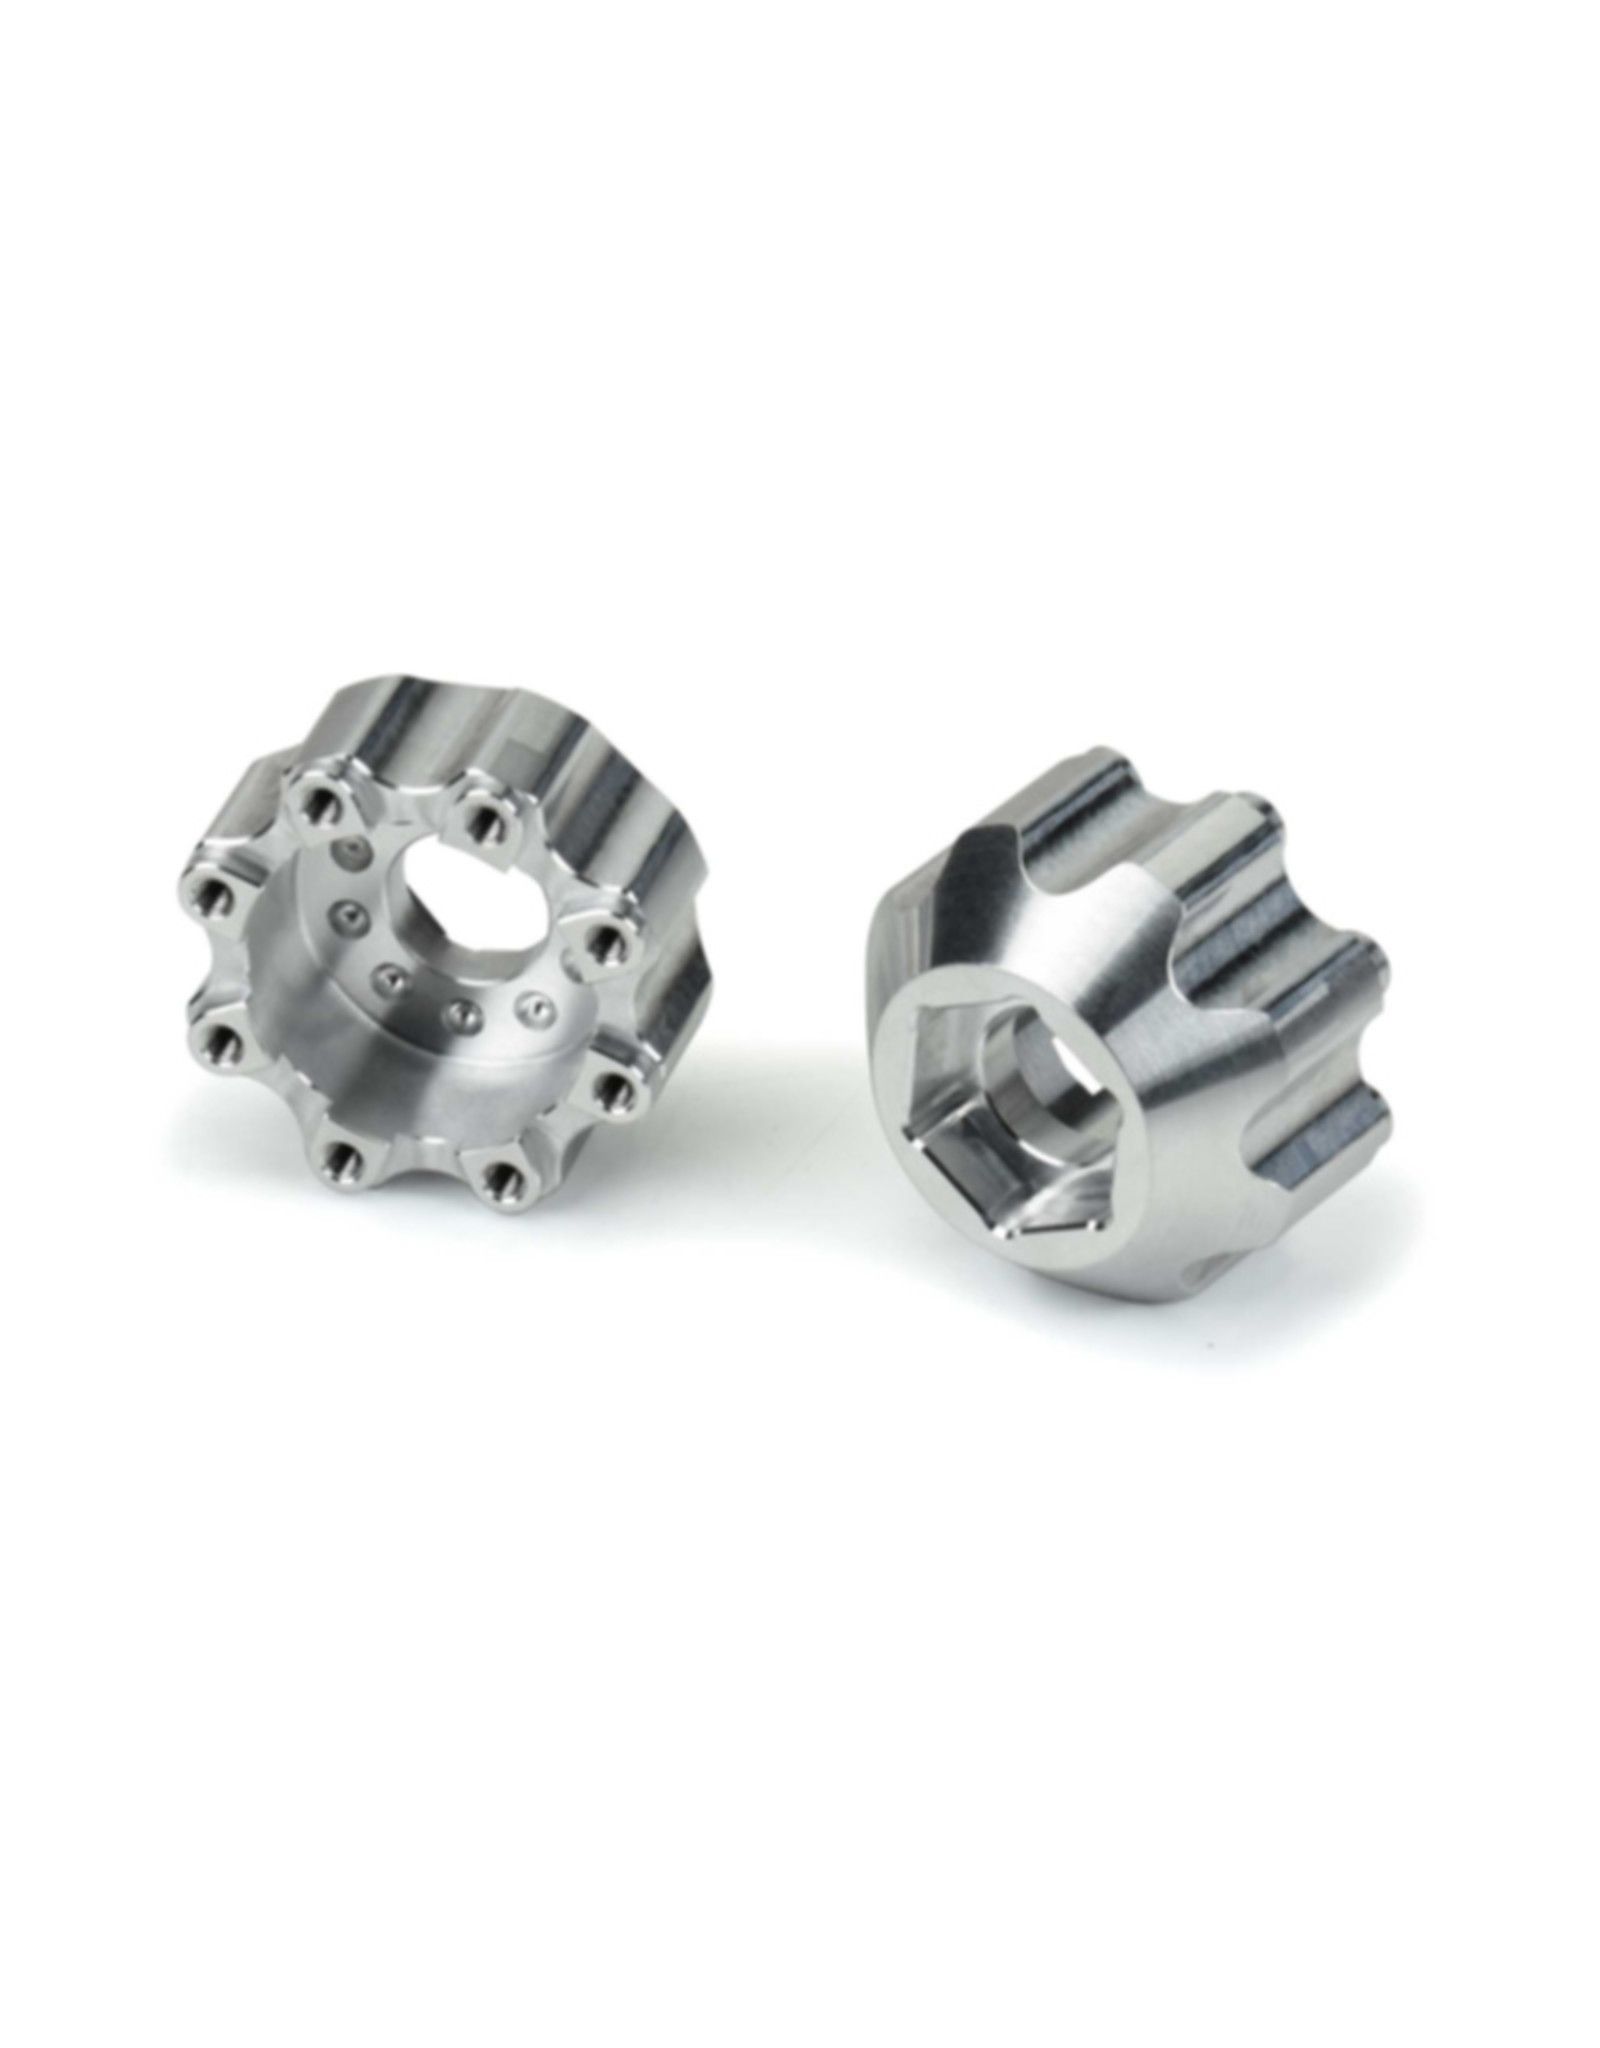 Pro-Line Racing PRO635300 8x32 to 17mm 1/2" Offset Aluminum Hex Adapters